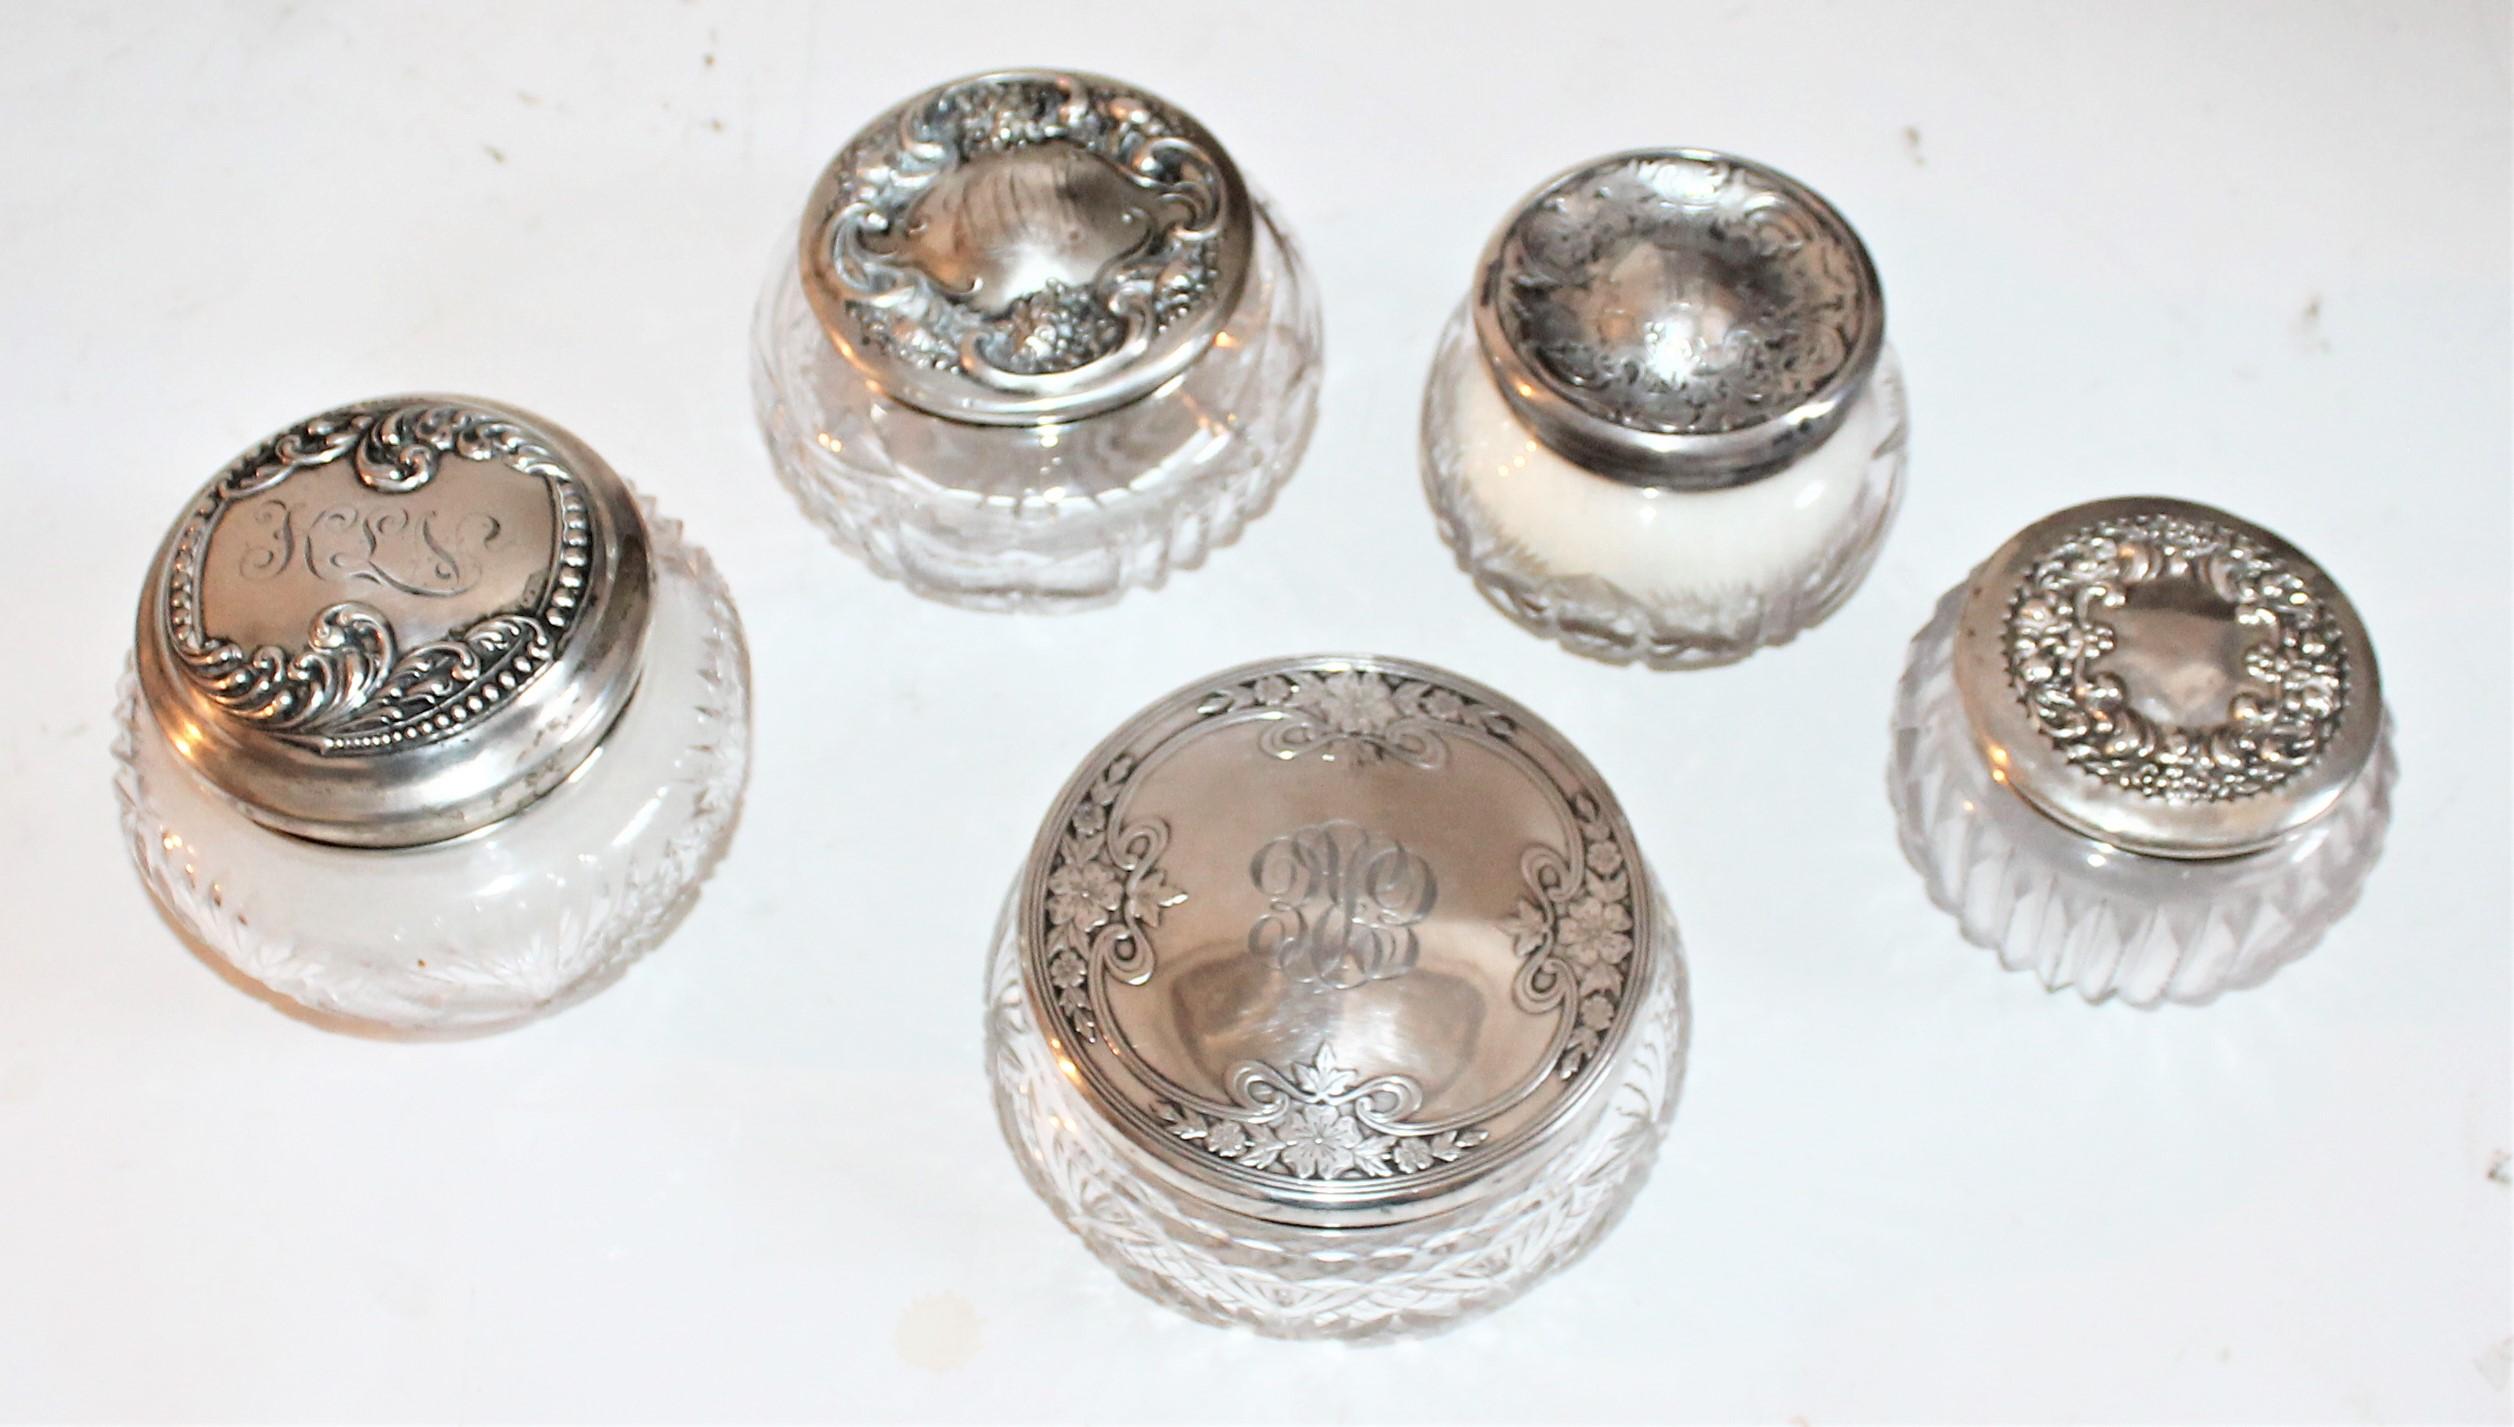 Measurements are as follows from left to right and center piece being last in measurements. Sterling silver lided cut glass jars.
4.5 x 4 , 3.5 x 3 , 3.5 x 2.75 , 4.5 x 3 , 5 x 2.3
   